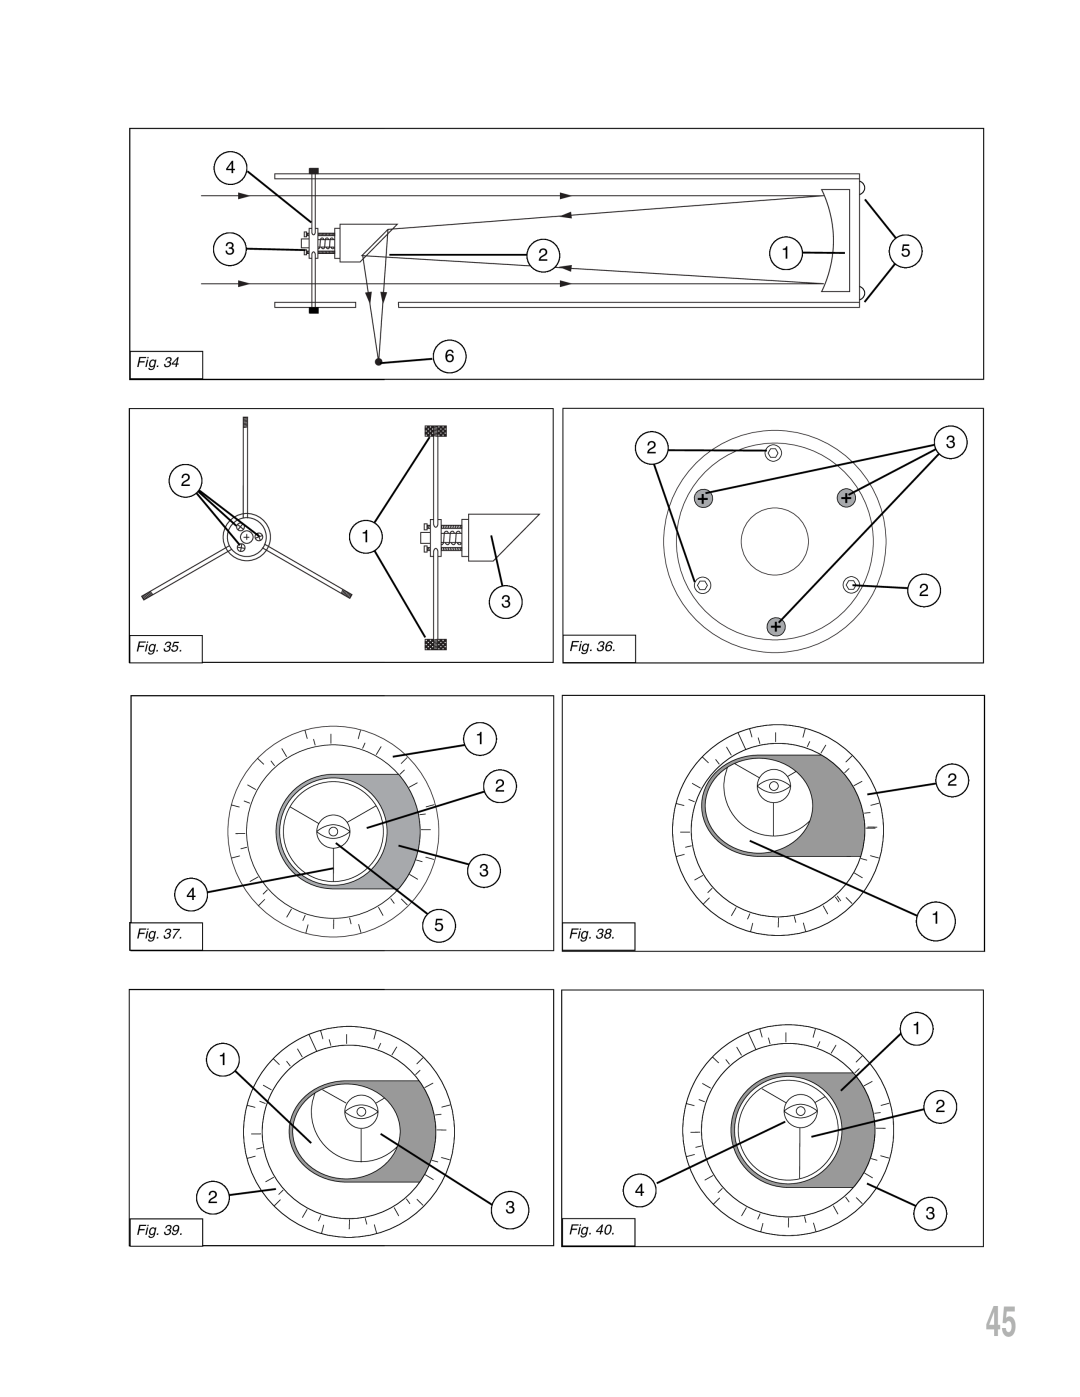 Meade LXD 75-Series instruction manual Fig 